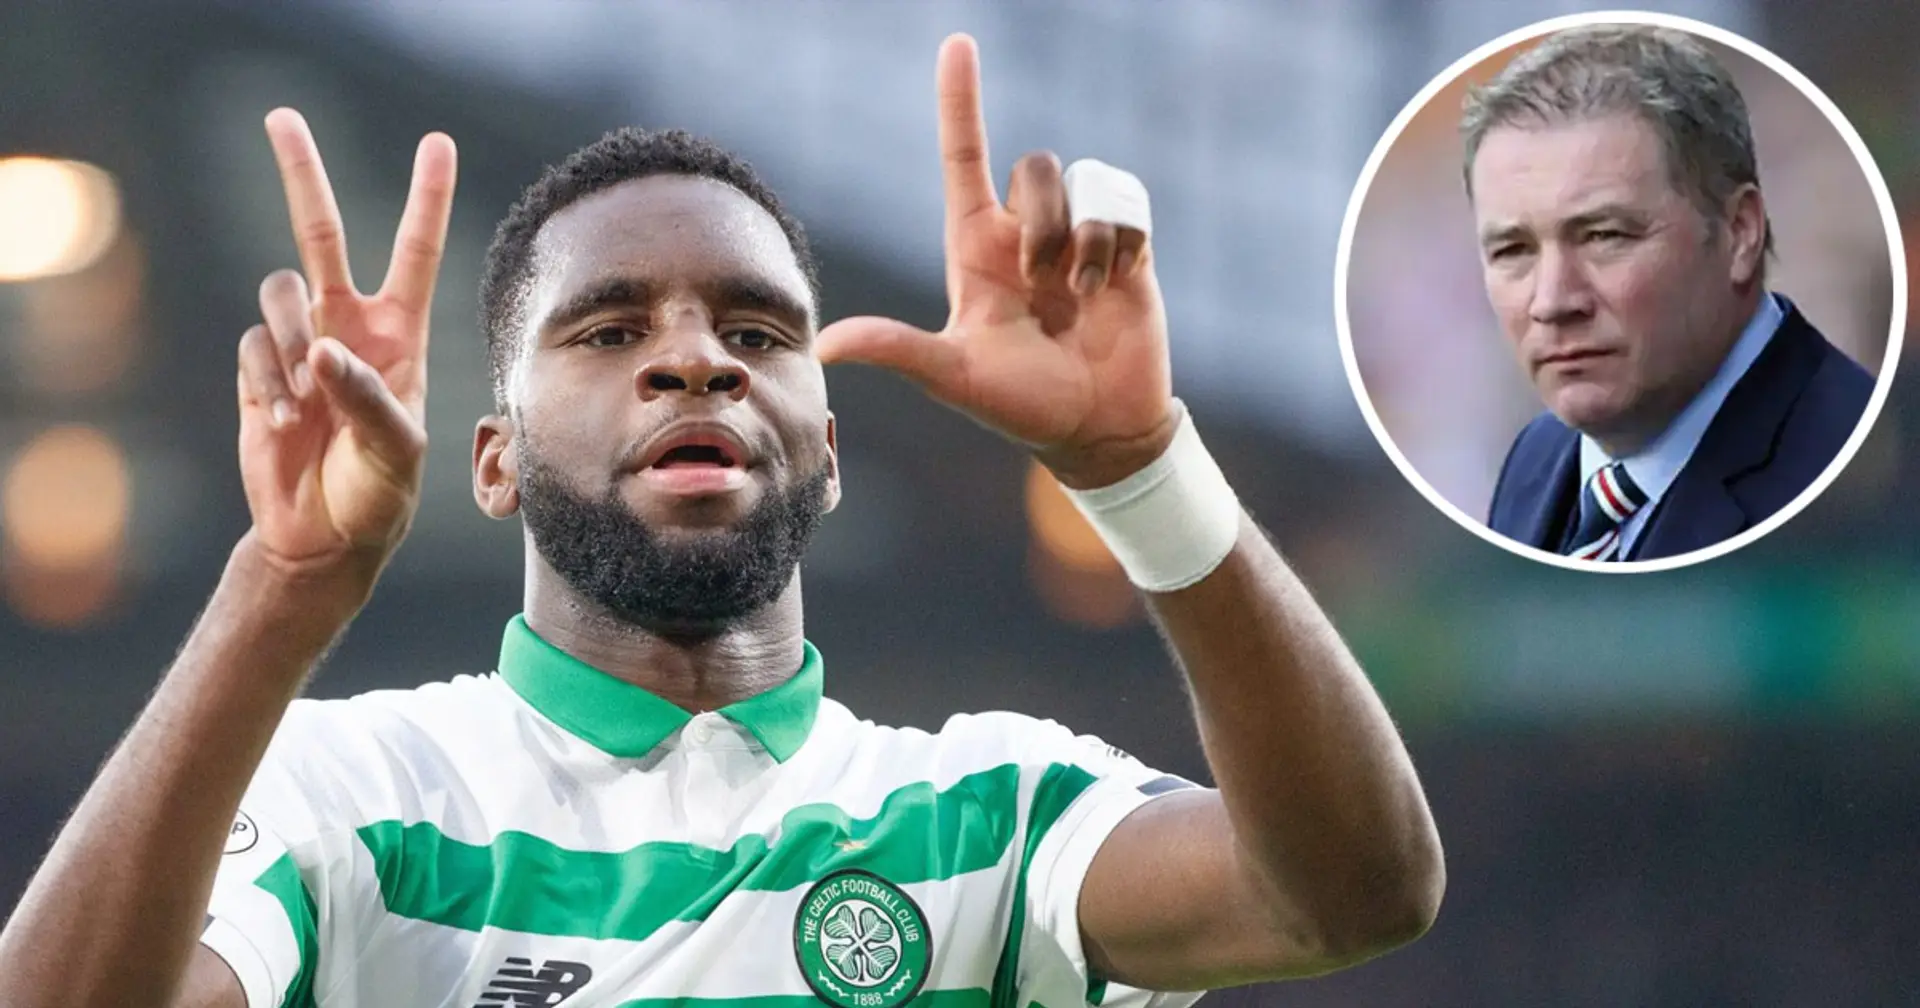 'They will get a right top player': pundit urges Arsenal to land Scottish Premiership top scorer Odsonne Edouard